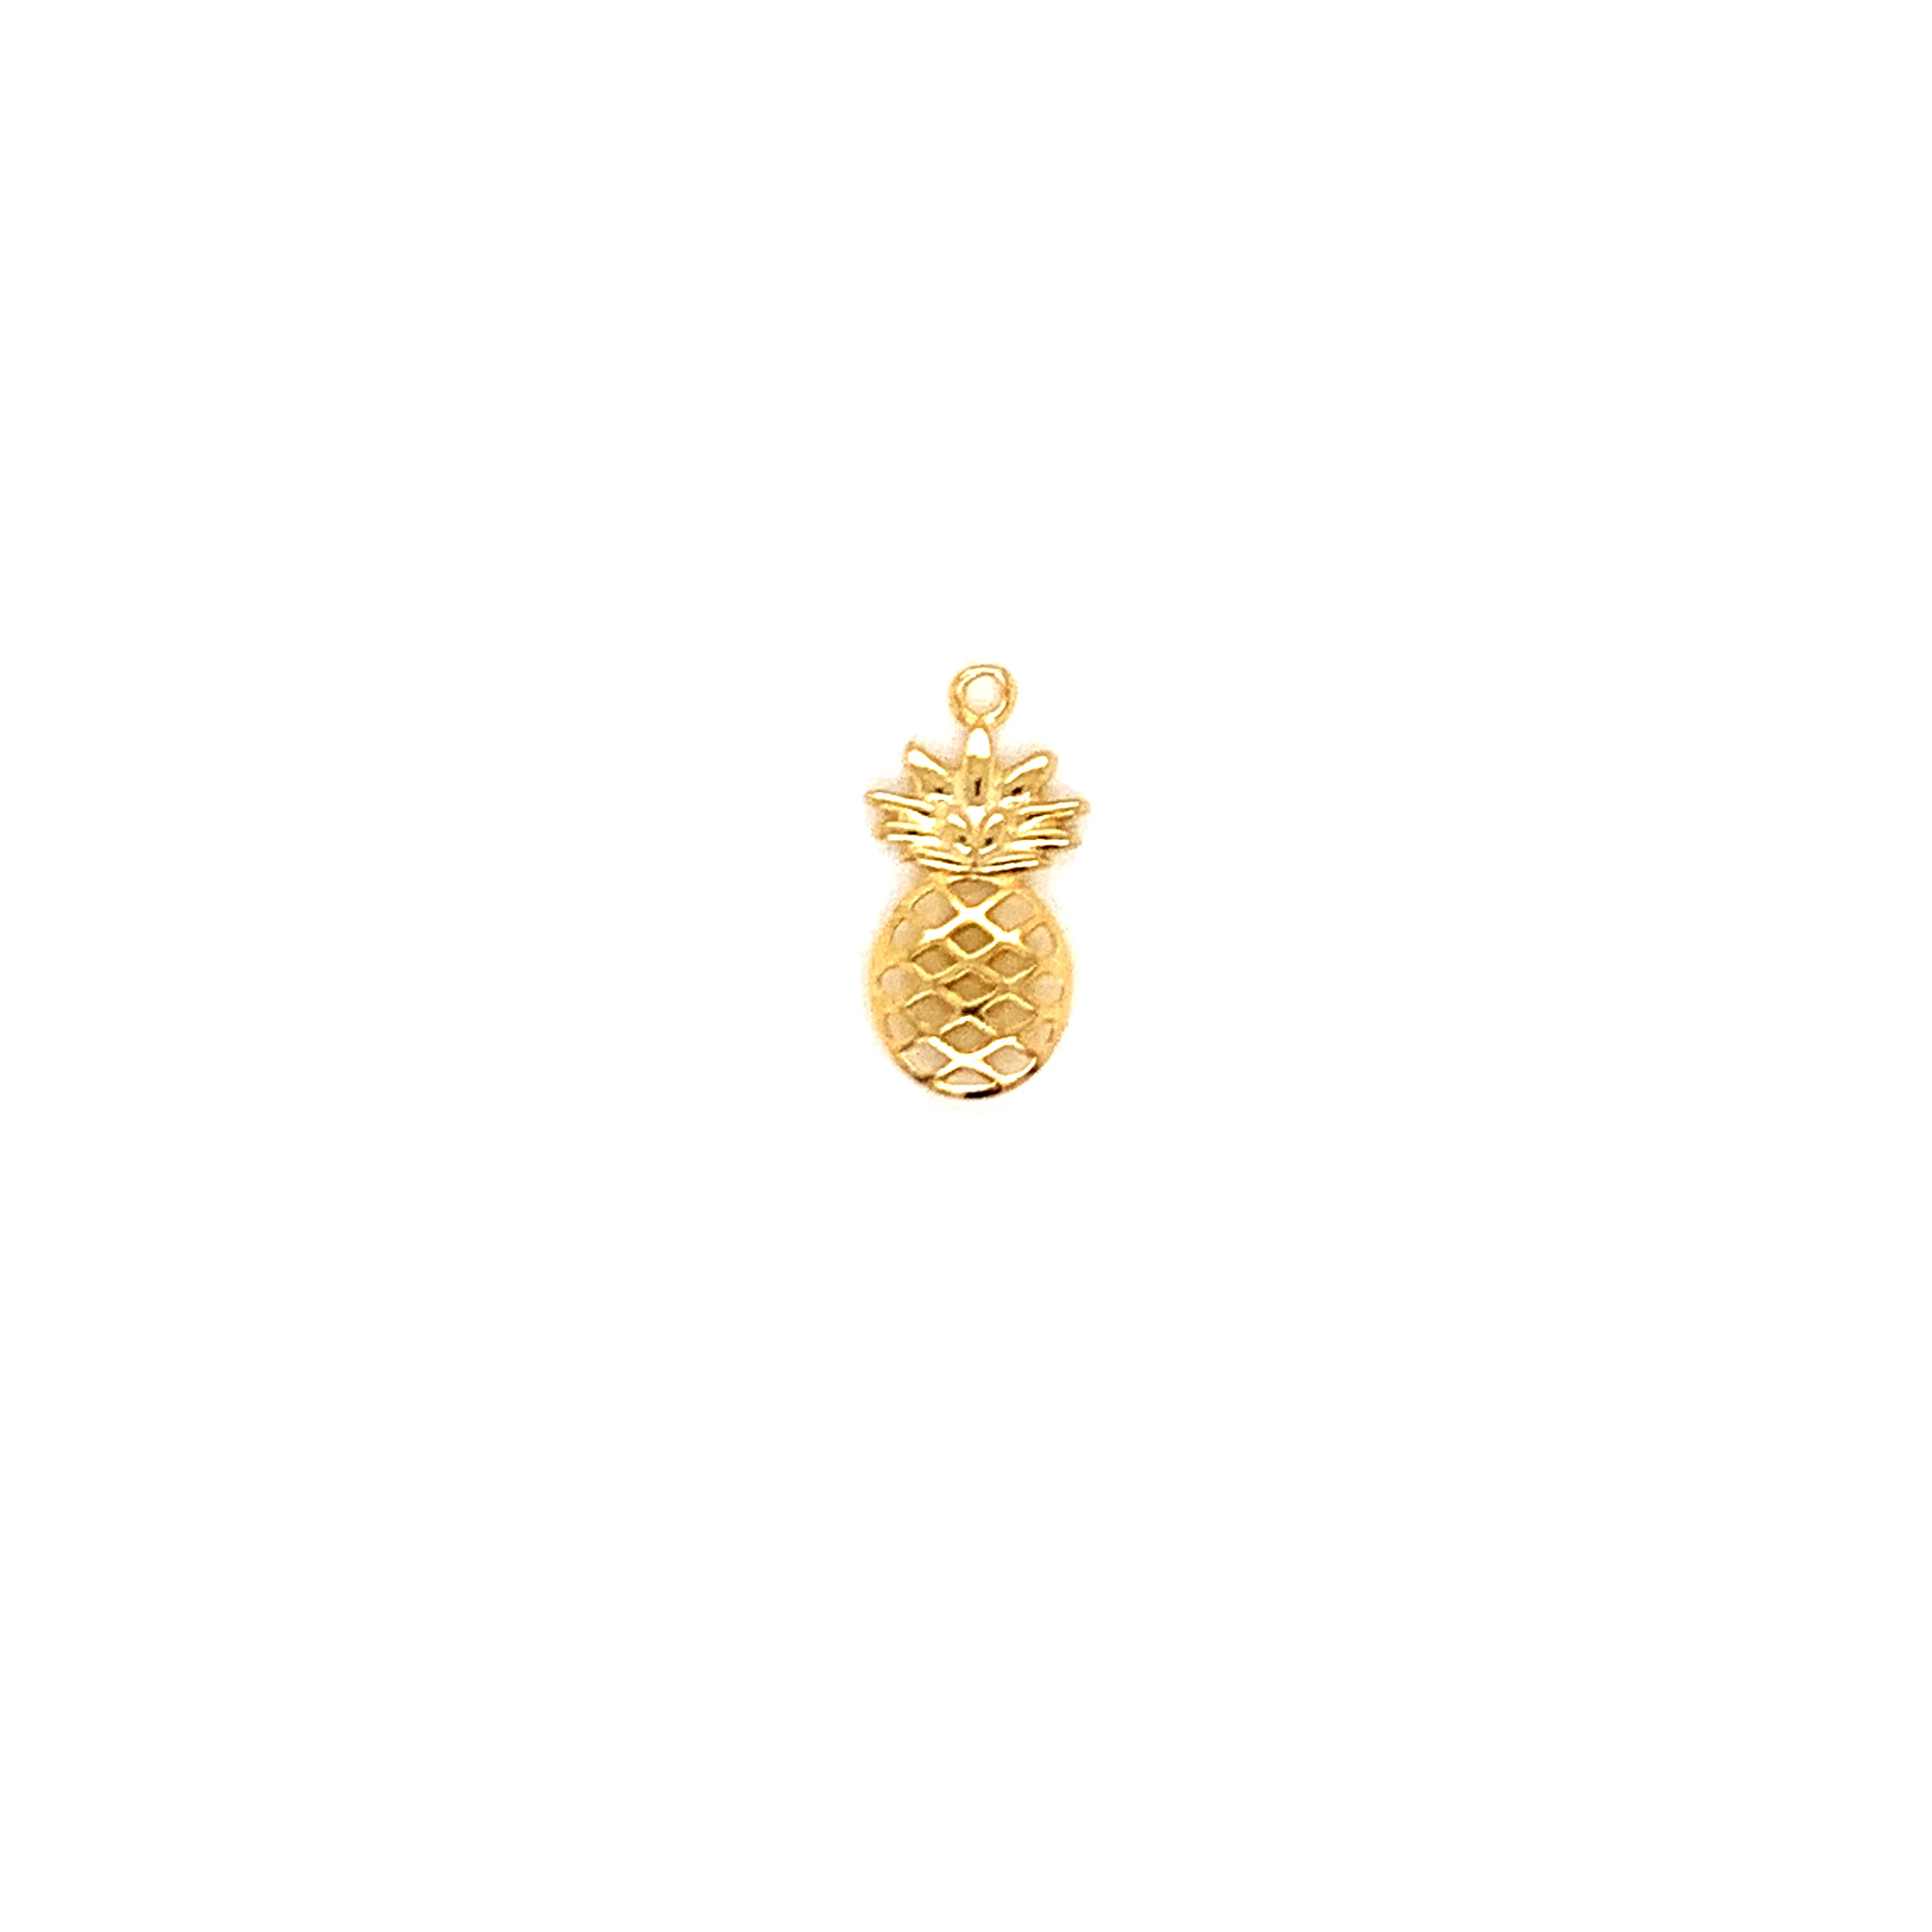 3D Pineapple Charm - Gold Plated